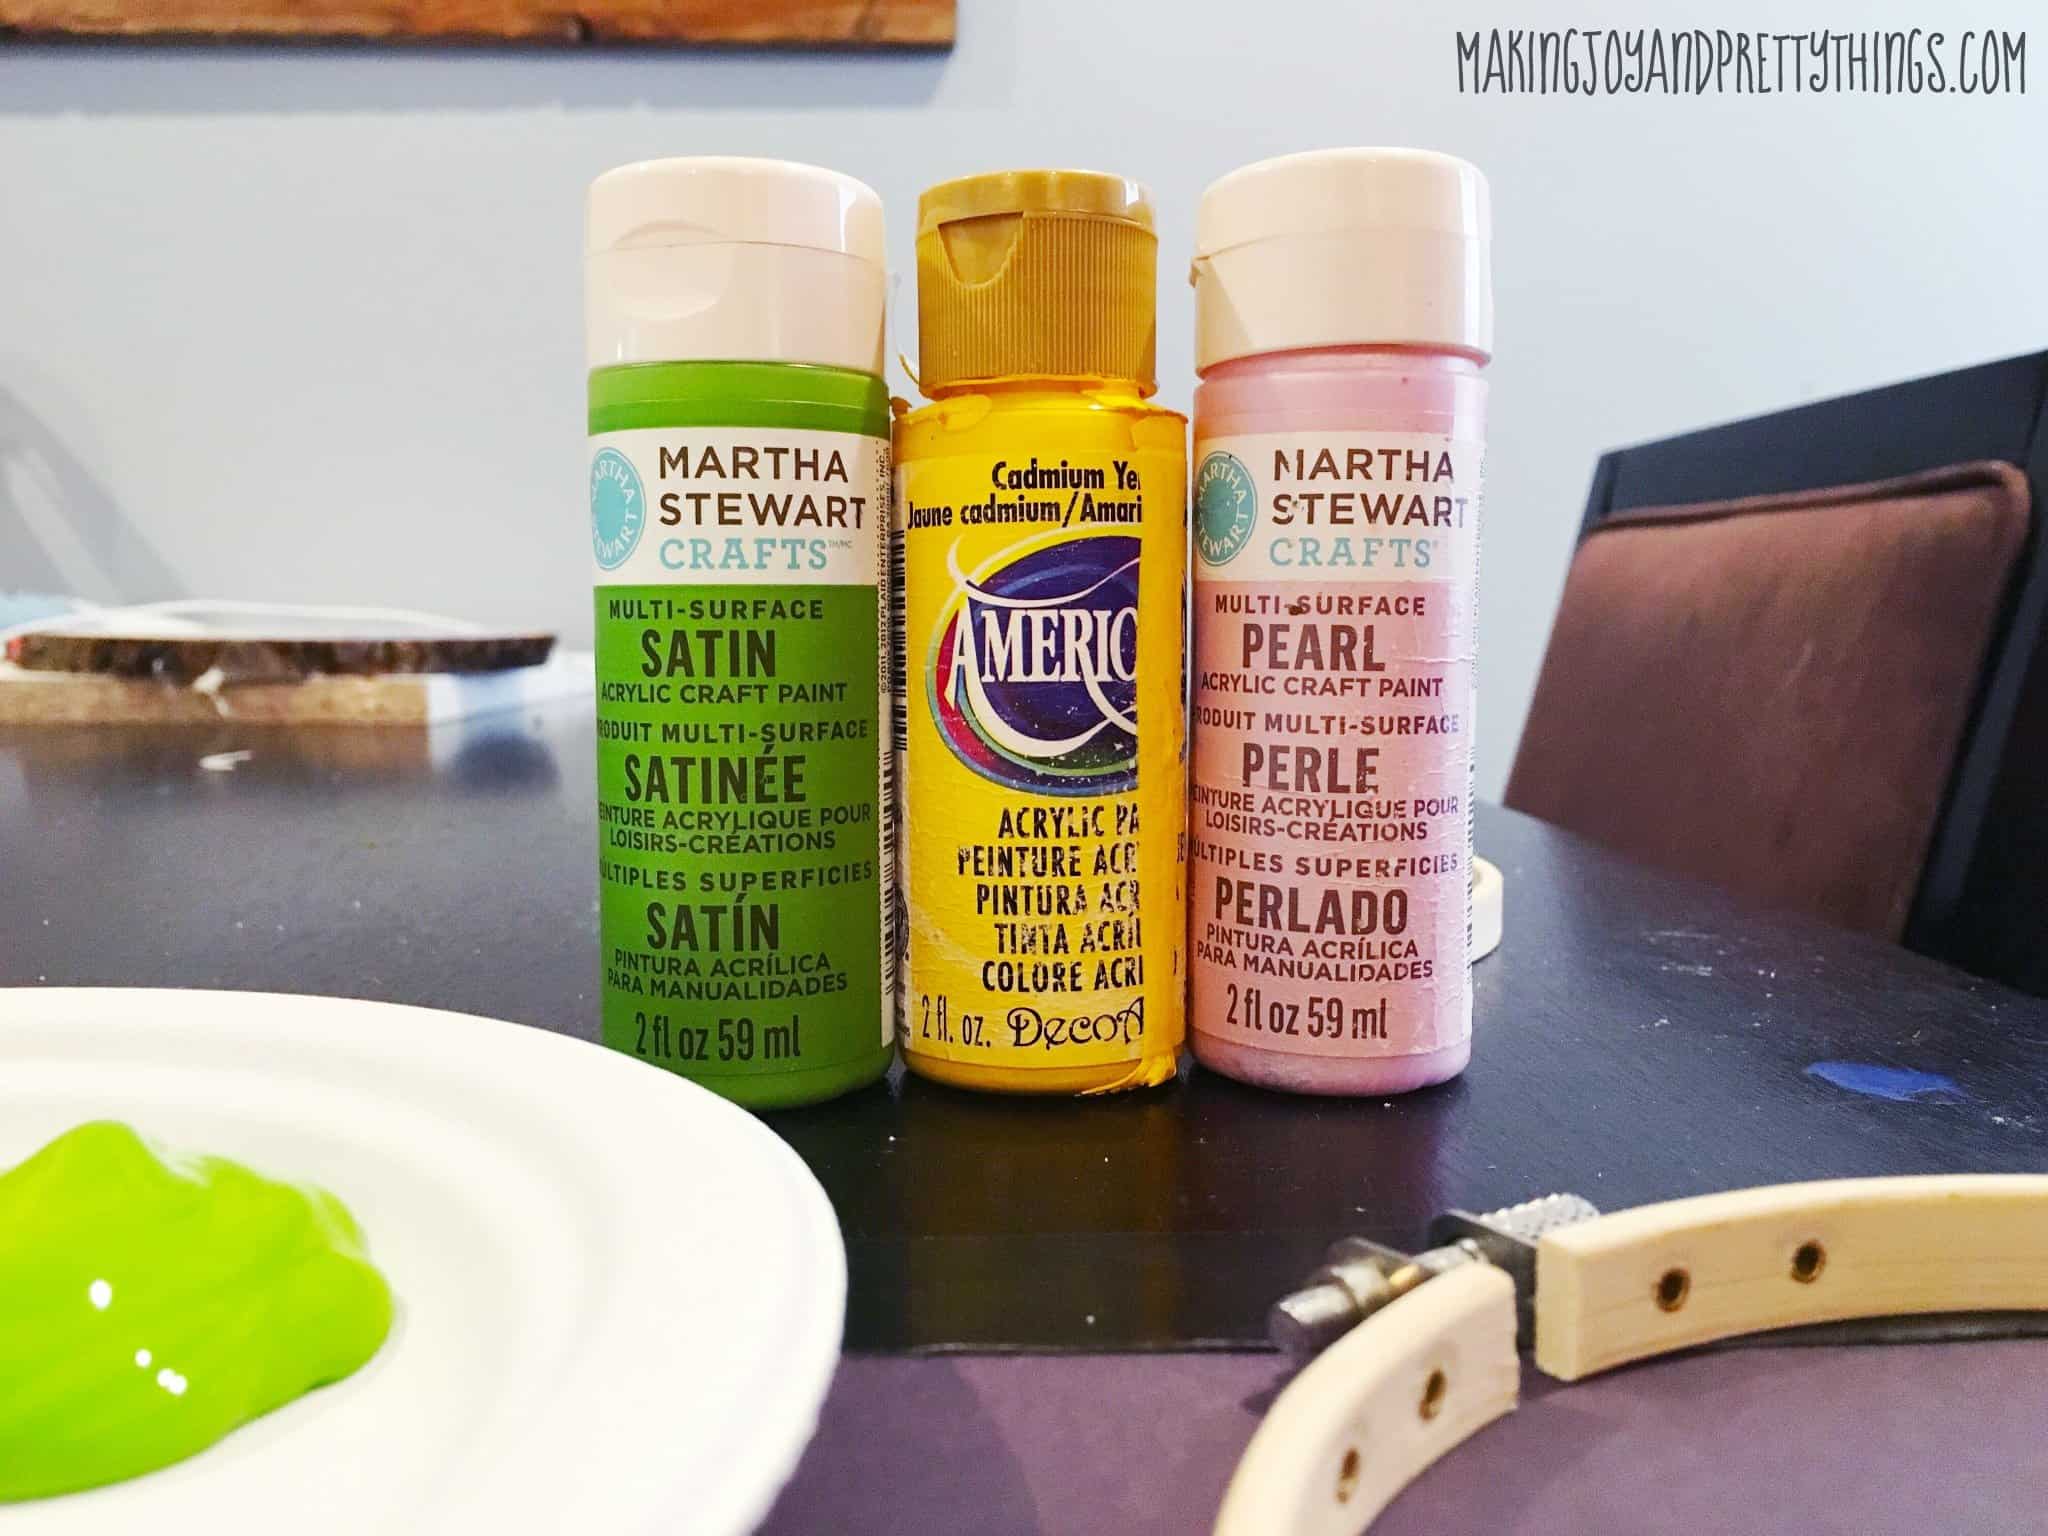 Small bottles of green, yellow, and pink acrylic craft paint lined up on a table. A dollop of green pain sits on a white paper plate, along with an empty craft hoop.